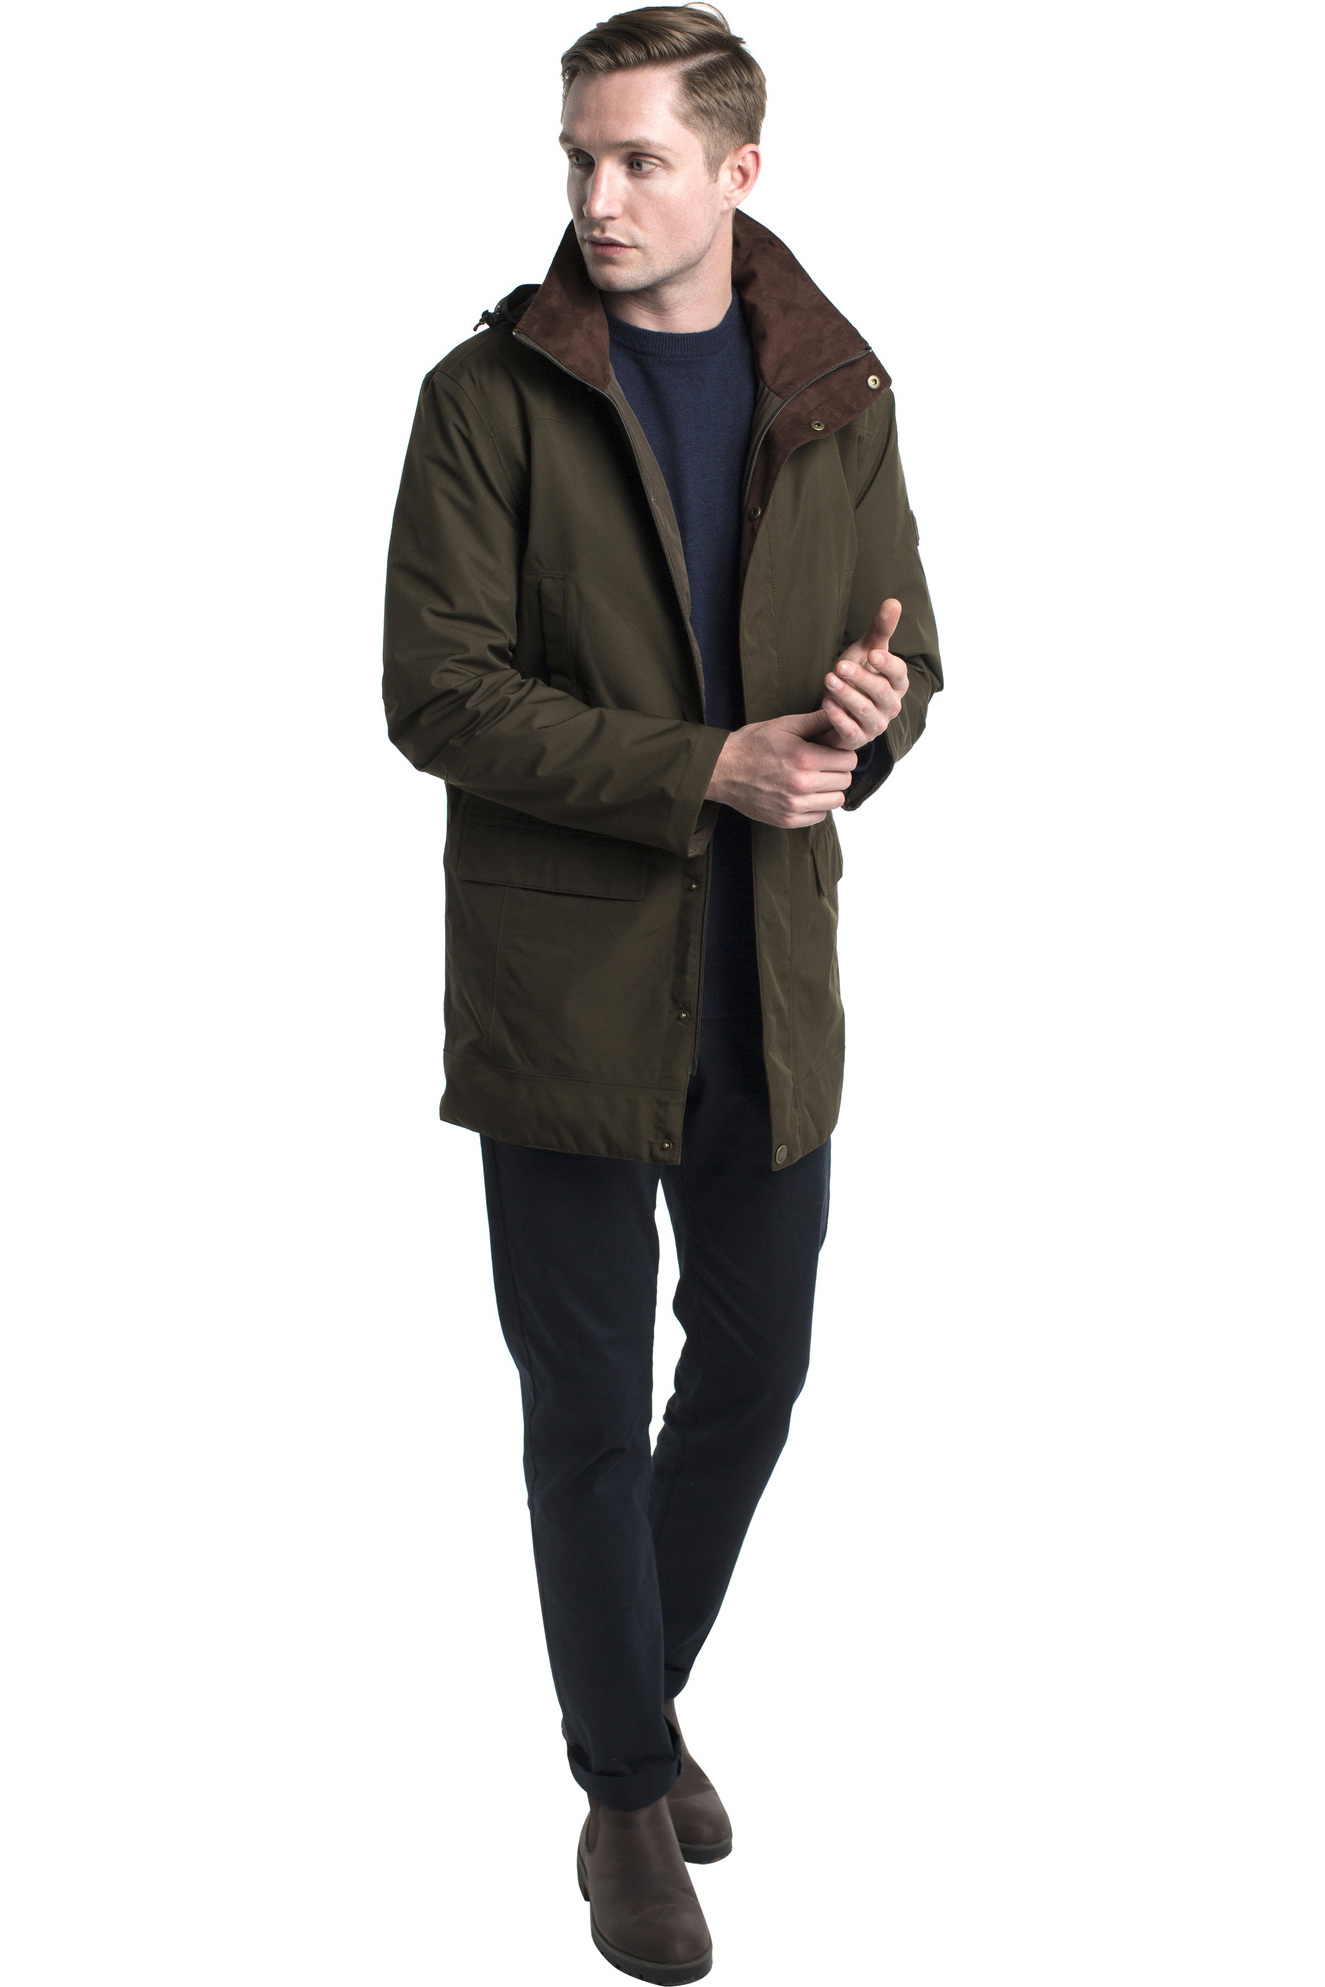 Dubarry Mens Ballywater Coat | The Drill Shed |